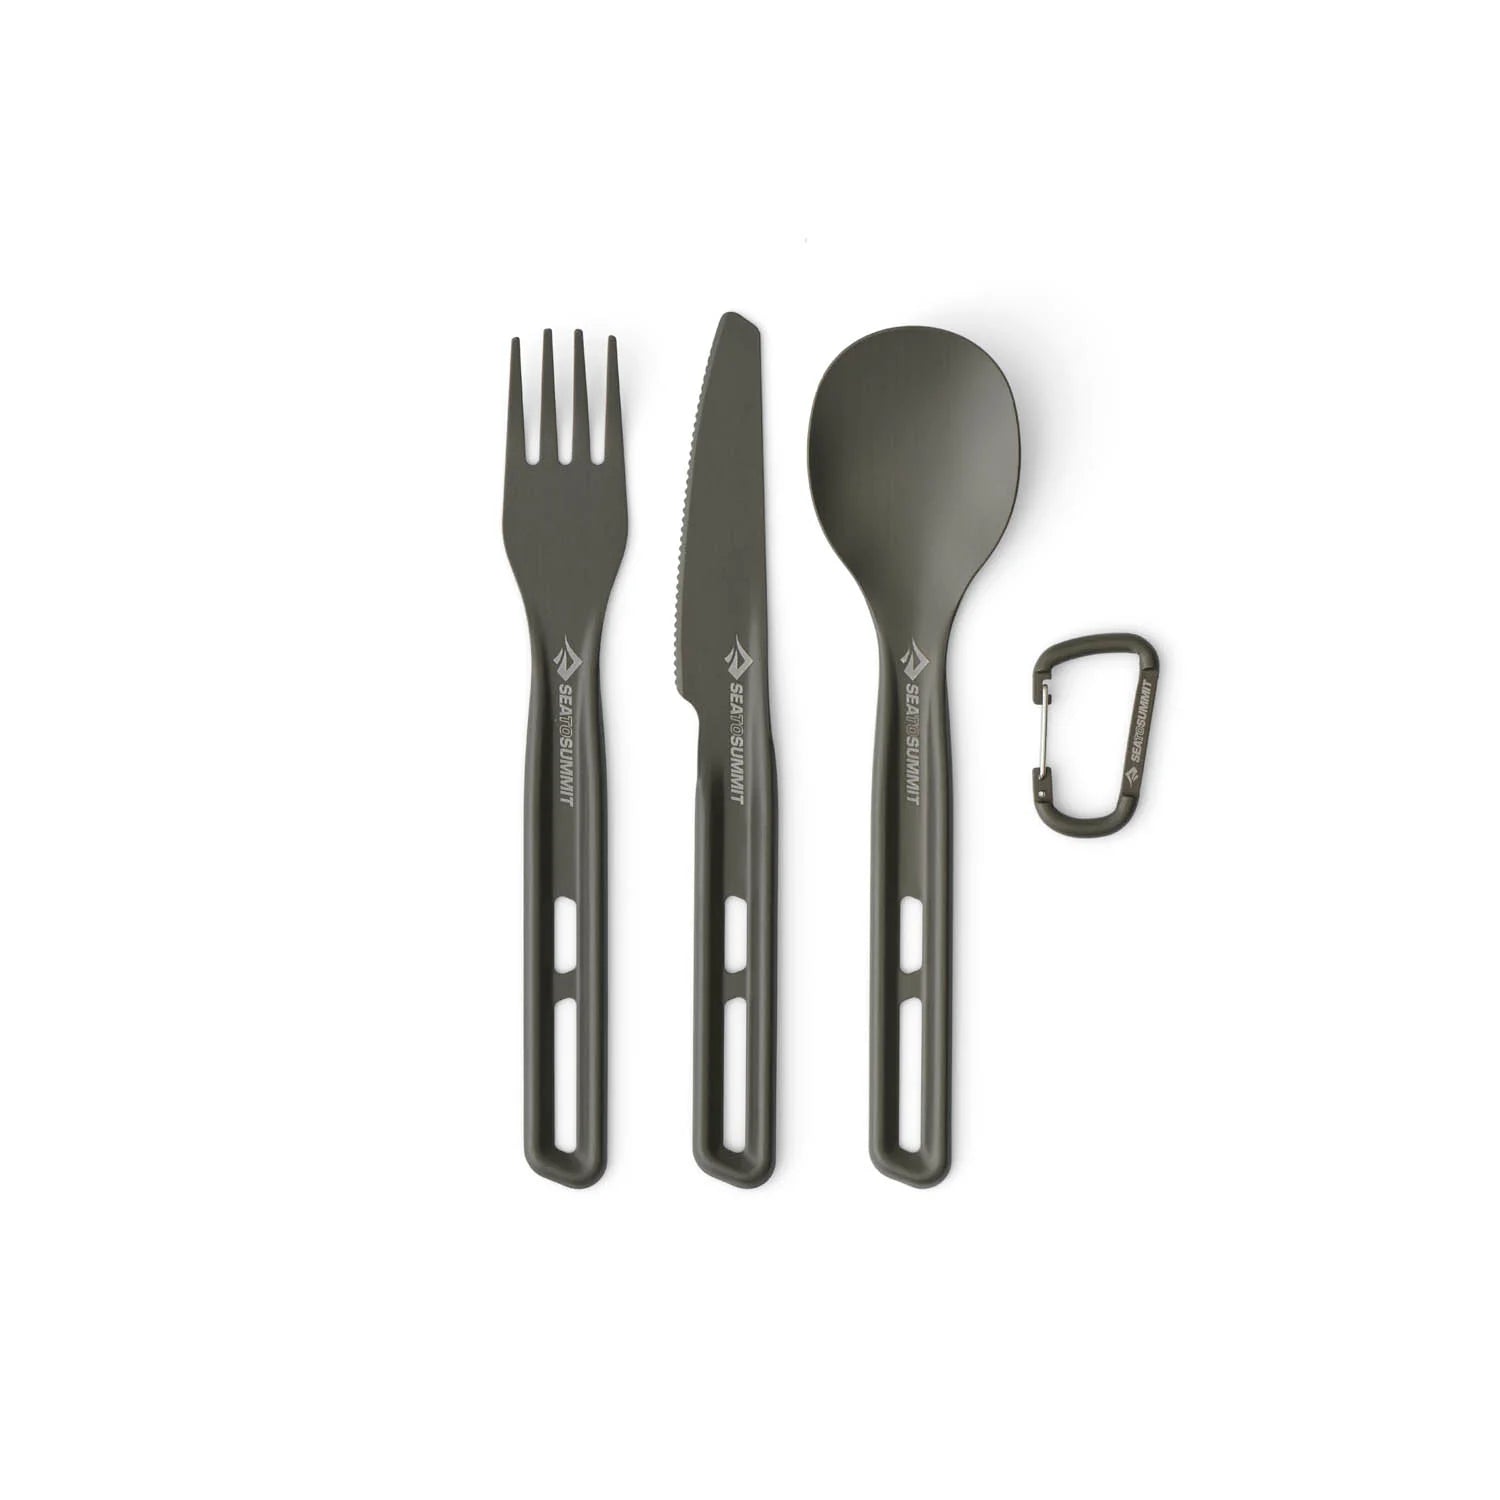 Sea to Summit Frontier UL Cutlery Set - 3 Piece -  - Mansfield Hunting & Fishing - Products to prepare for Corona Virus